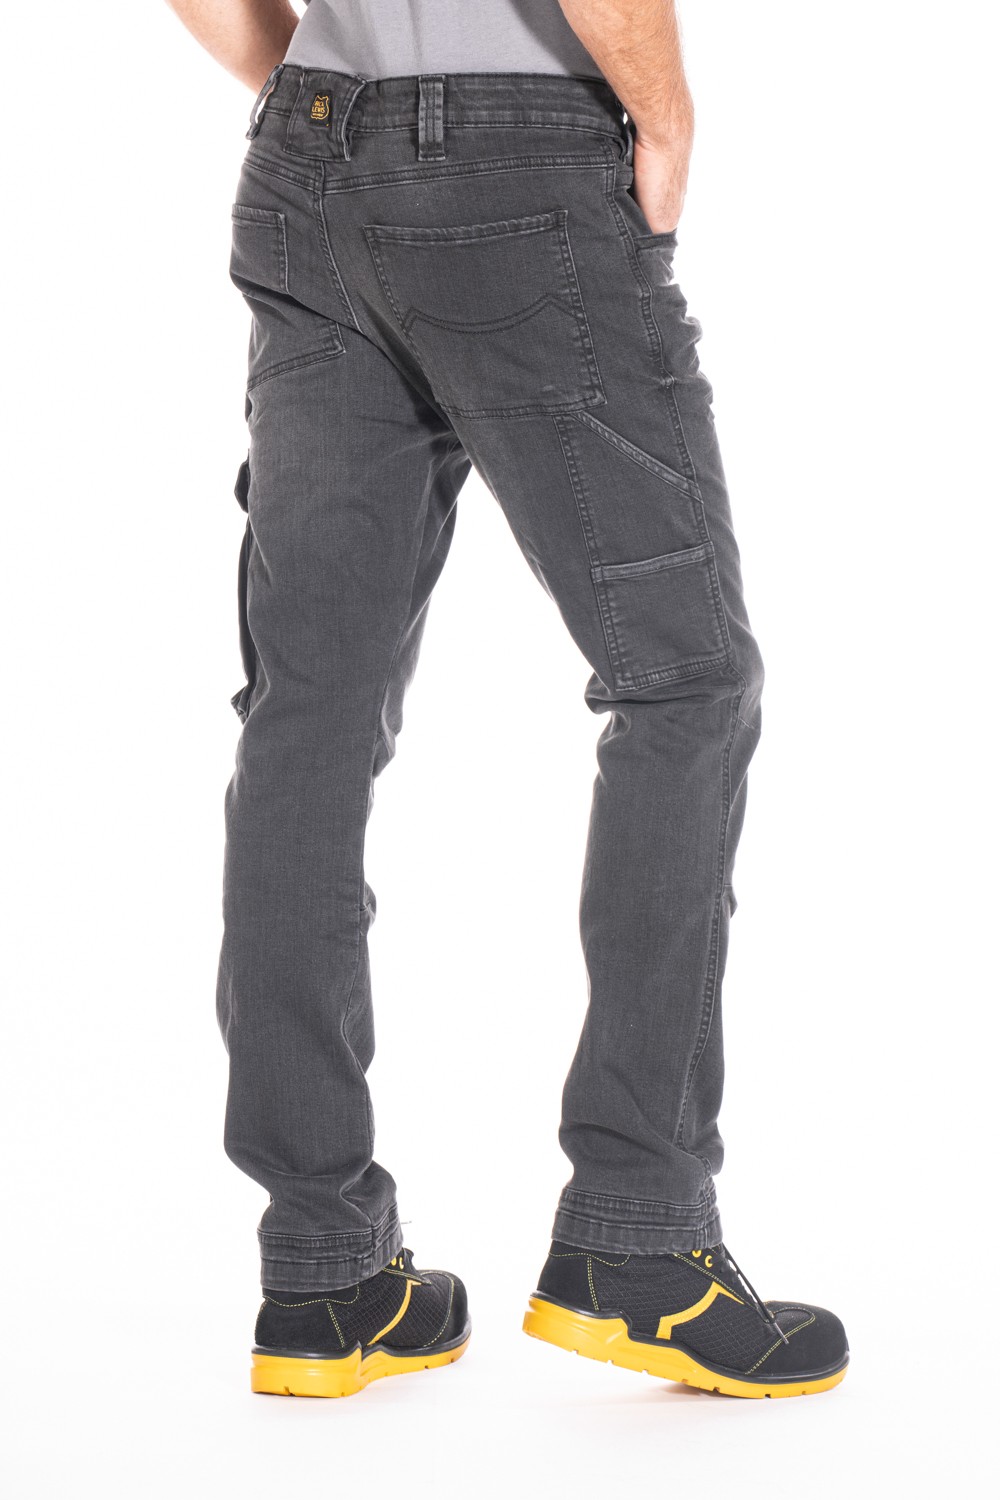 Jeans travail multipoches confort stretch Job Rica Lewis gris cotepro